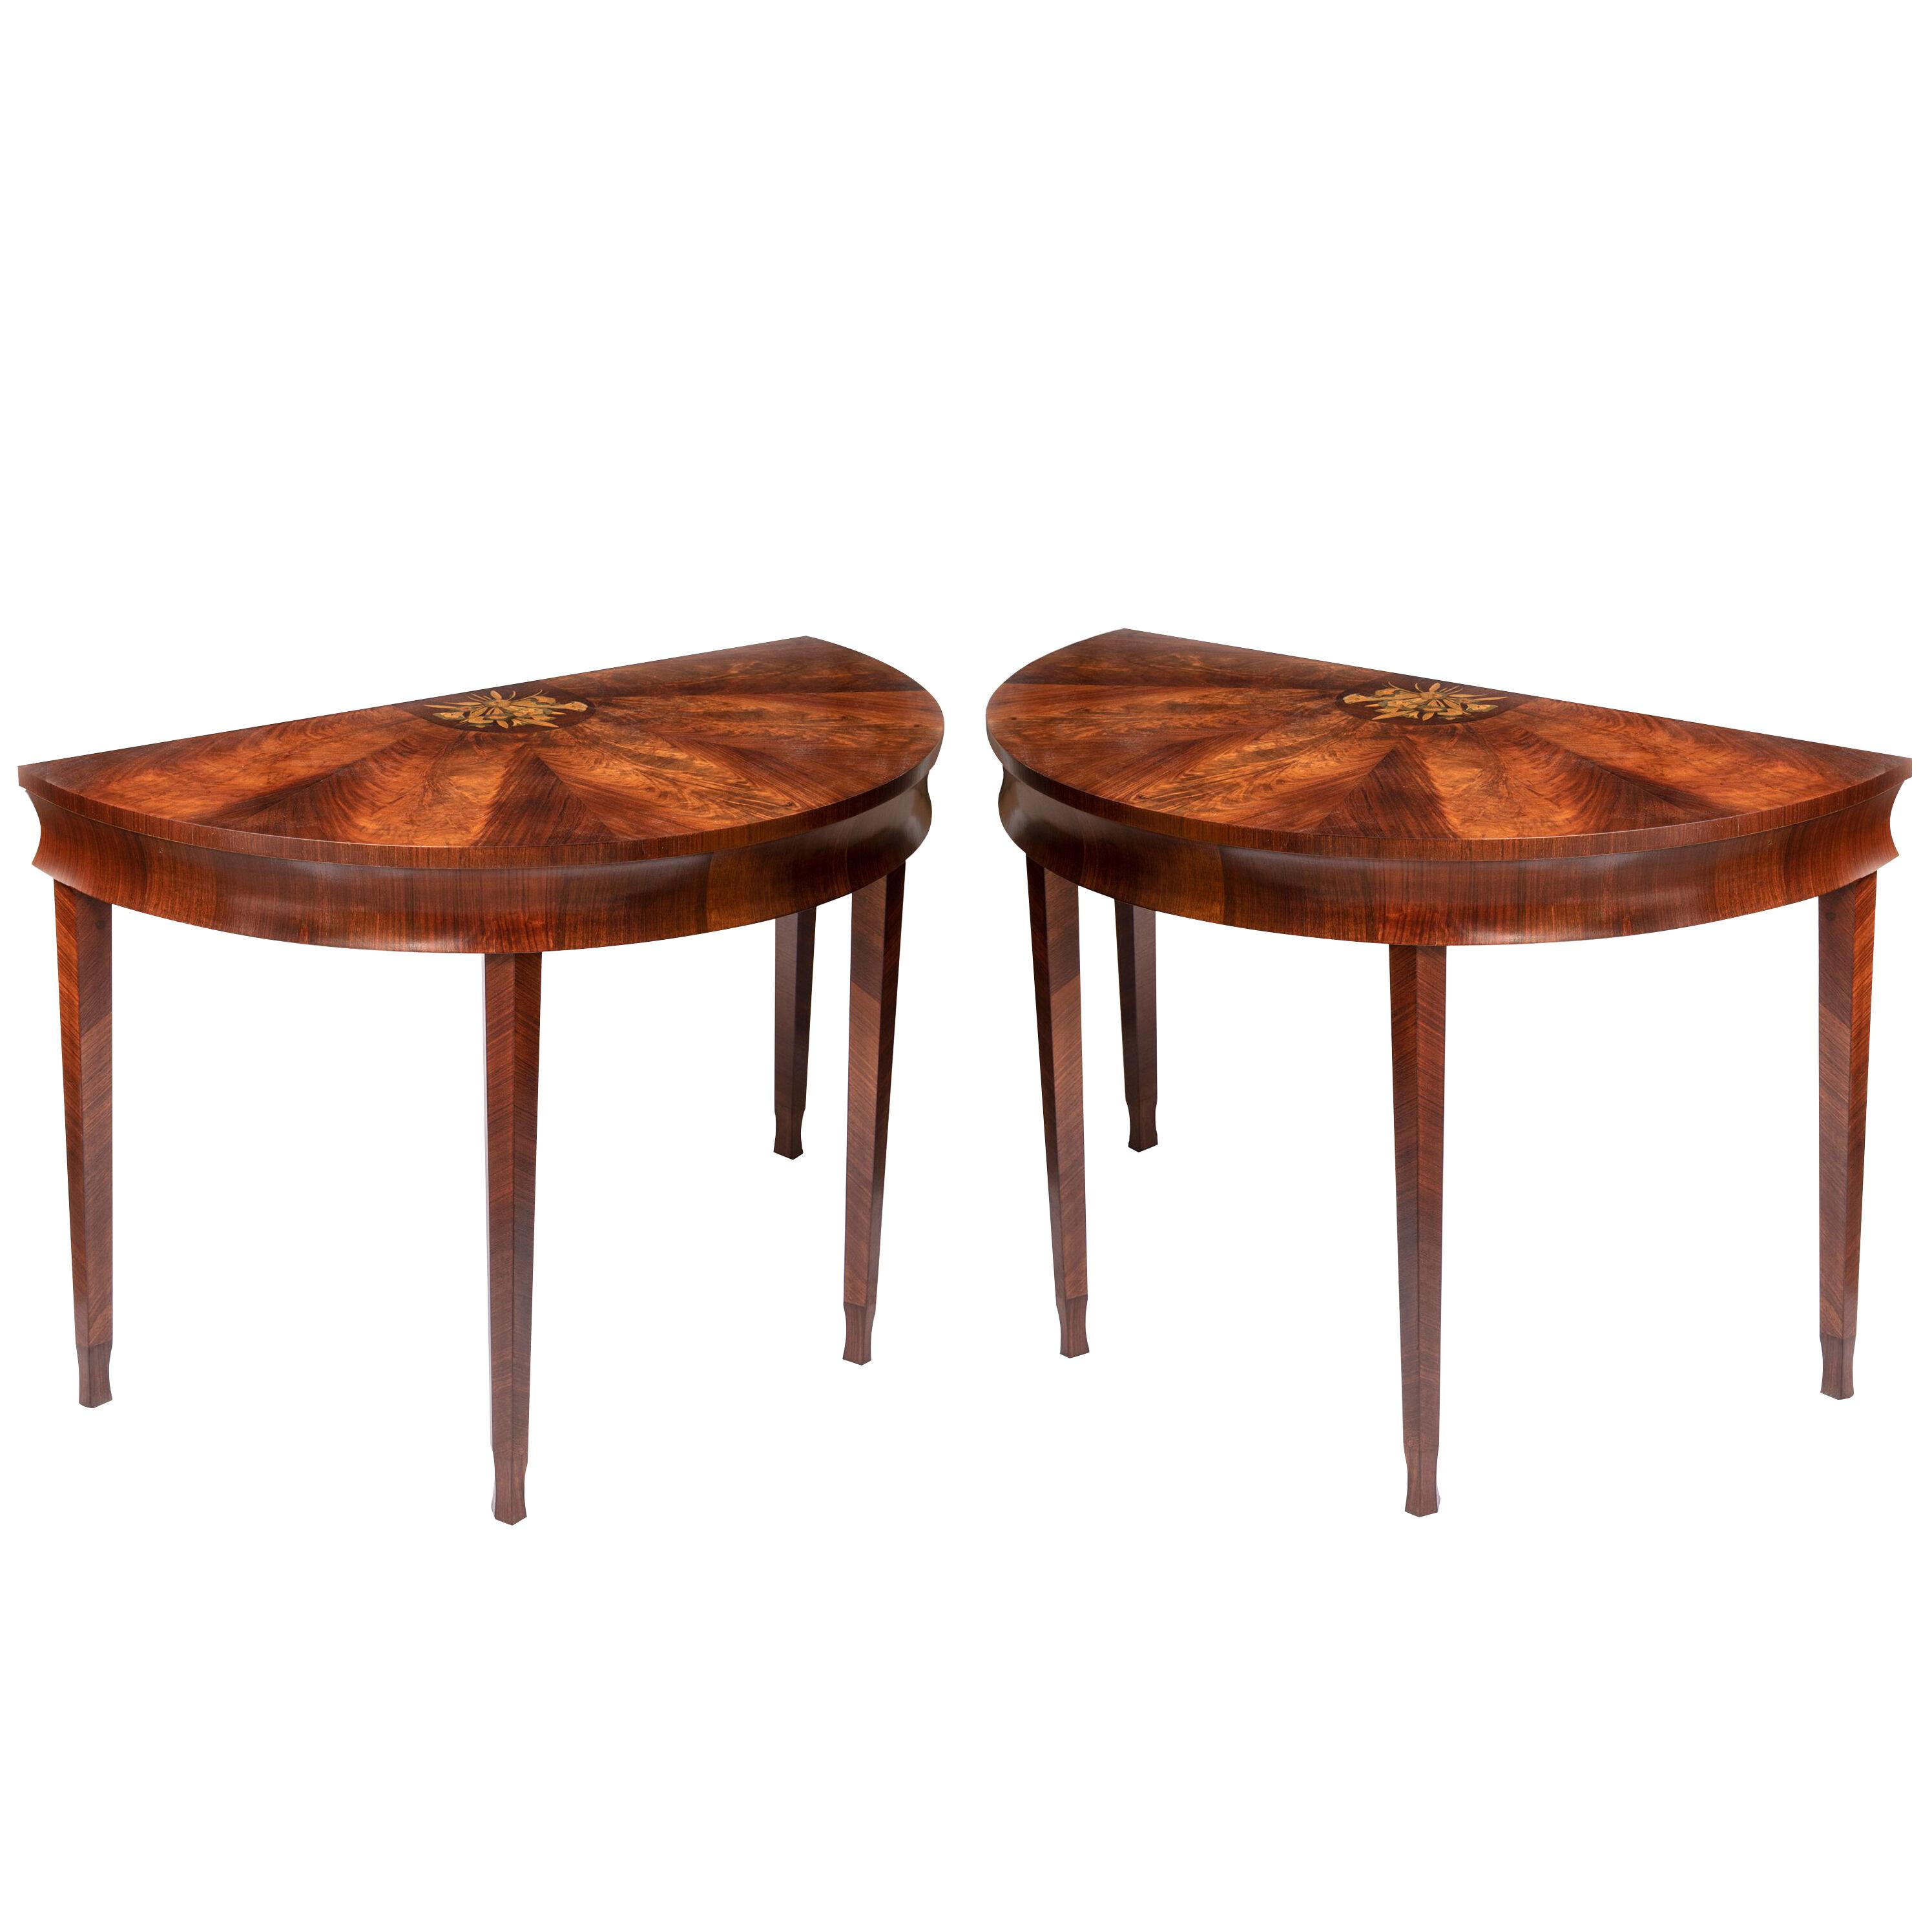 Pair of side tables attributed to Heals of London, England circa 1920